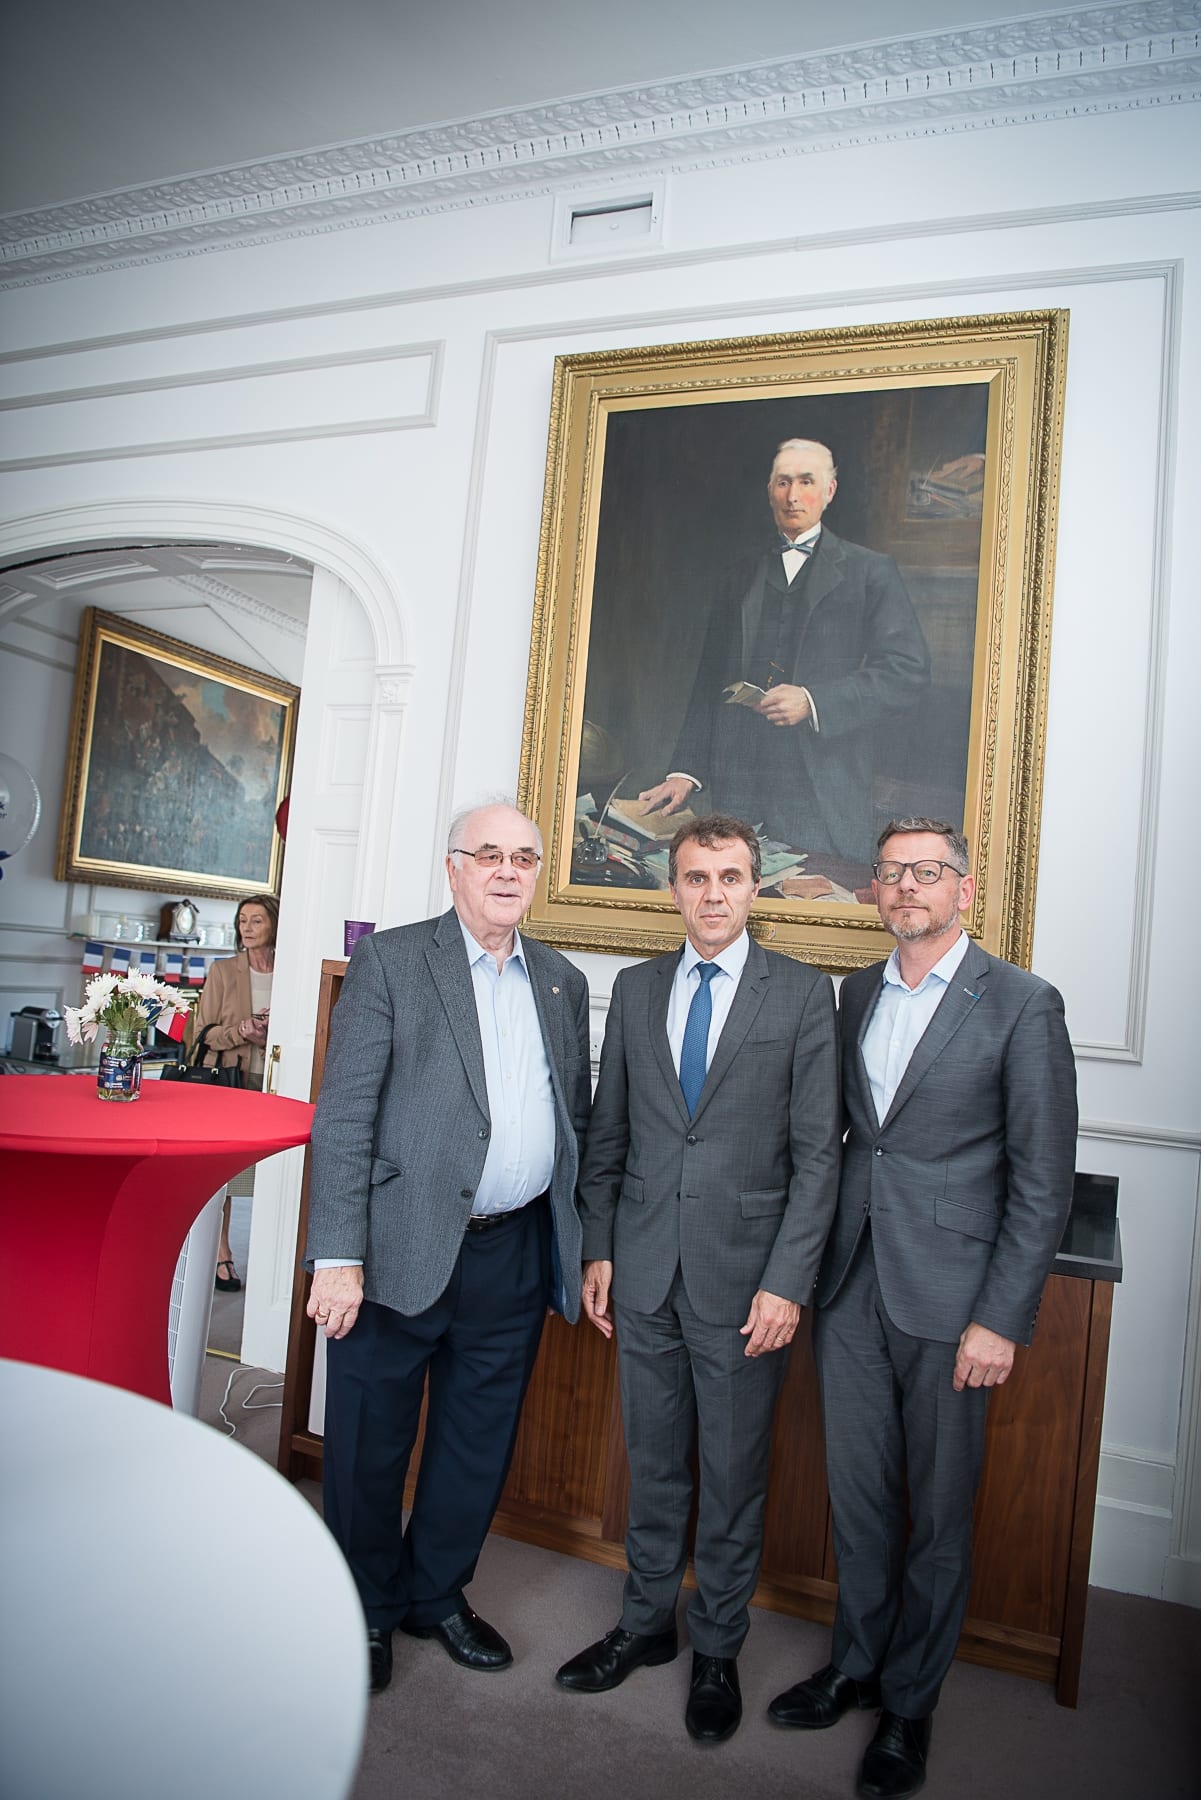 no repro fee- 
From Left to Right:  French Embassy Event which took place on the 18th June in the Limerick Chamber Boardroom:  Tony Brazil - Spanish Vice Consulate, HE Stéphane Crouzat - French Embassy,  John Moran - Hunt Museum.
Photo by Morning Star Photography